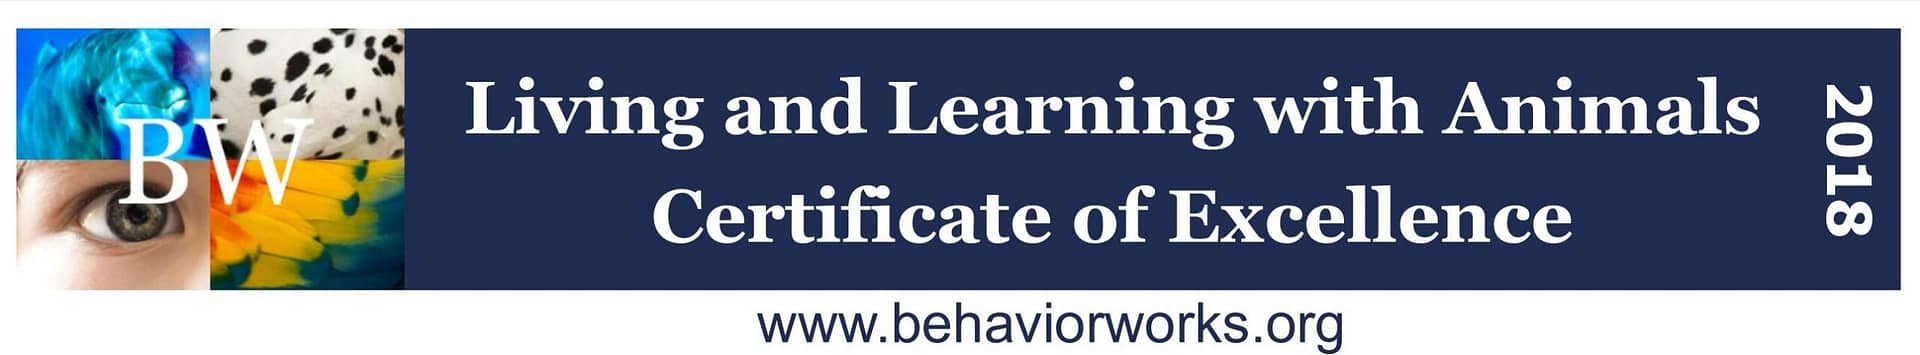 Living and Learning with Animals Certificate of Excellence 2018